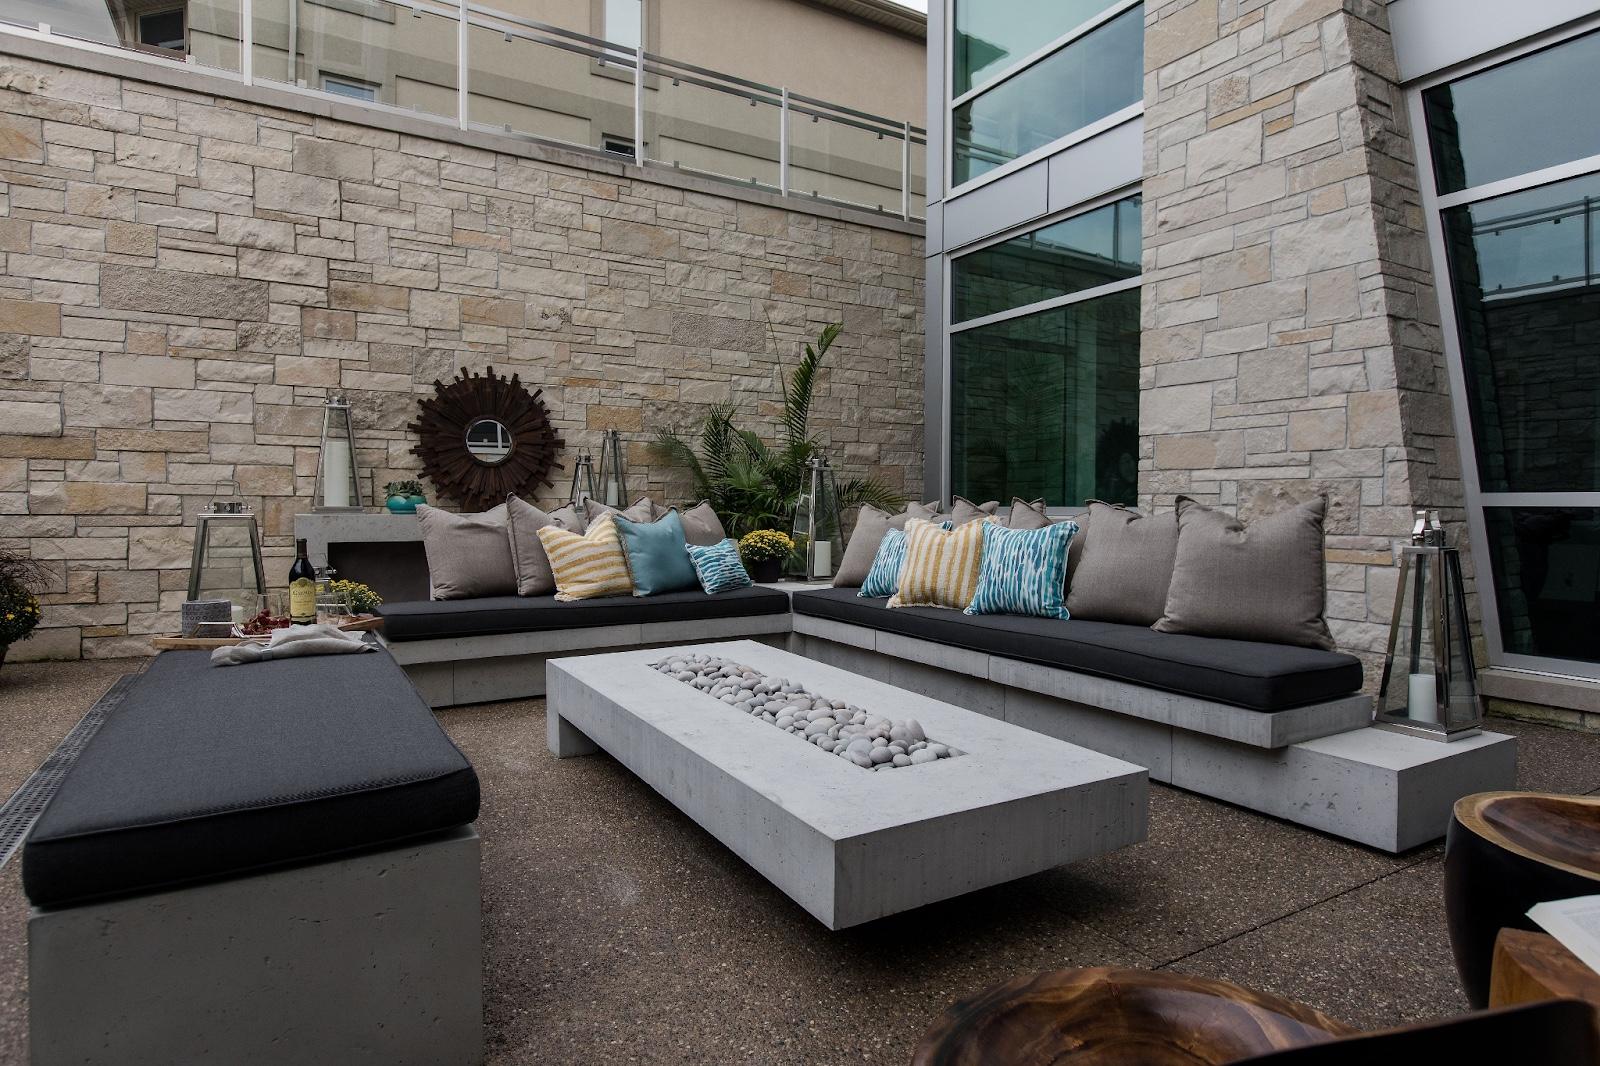 This outdoor sitting area has three sofas. There is a large rectangular fire pit in the middle of the sitting area.